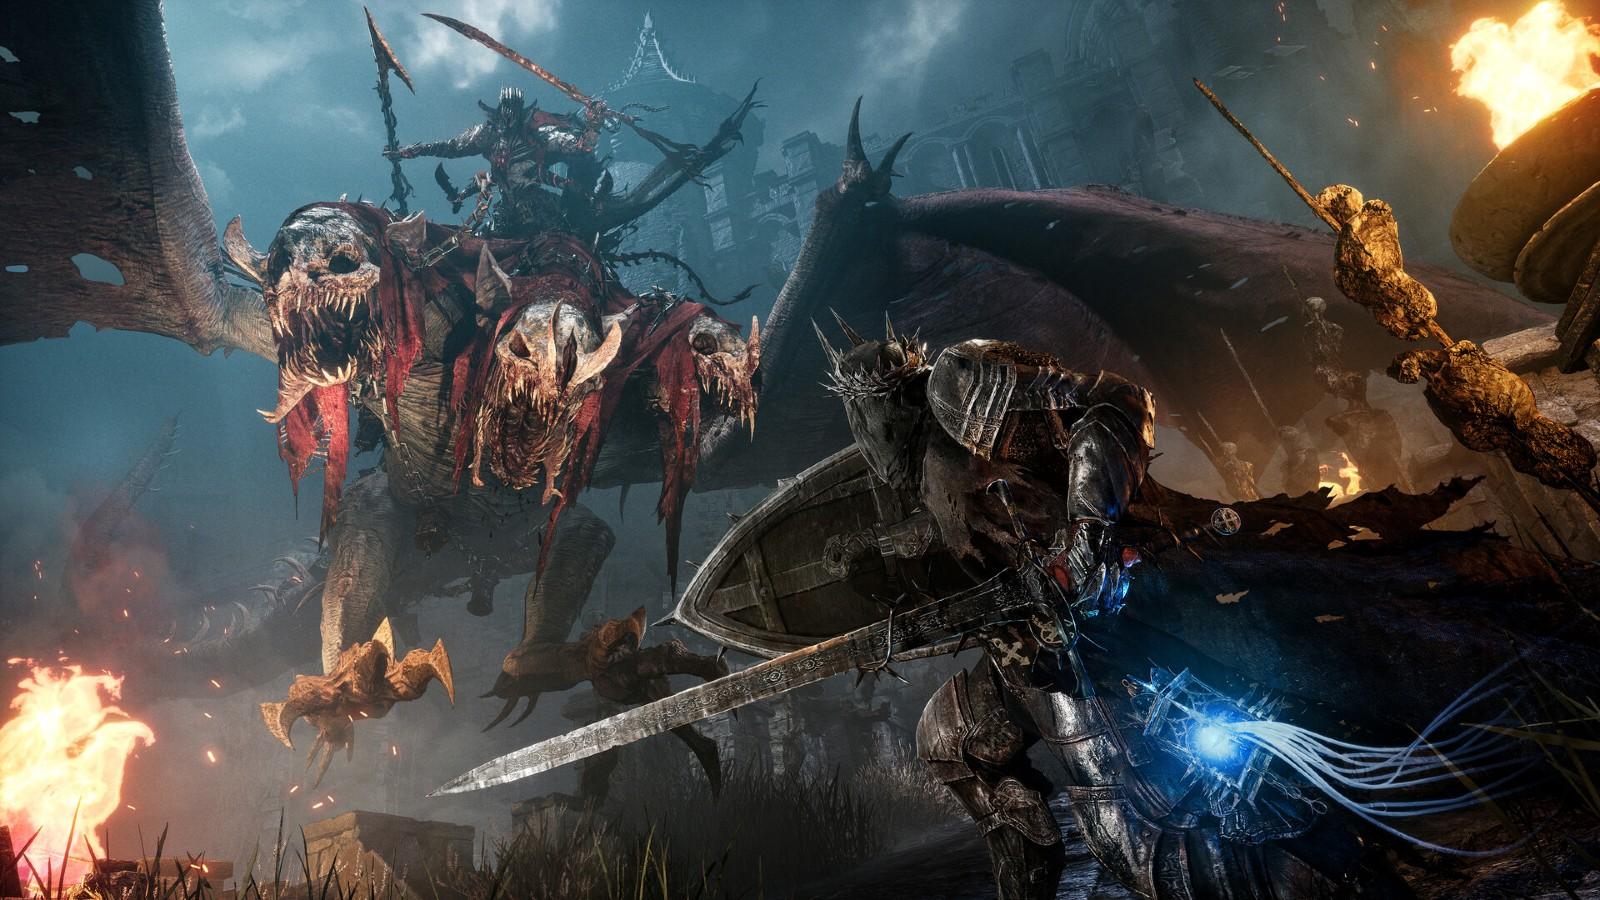 A promotional image from The Lords of the Fallen featuring combat.